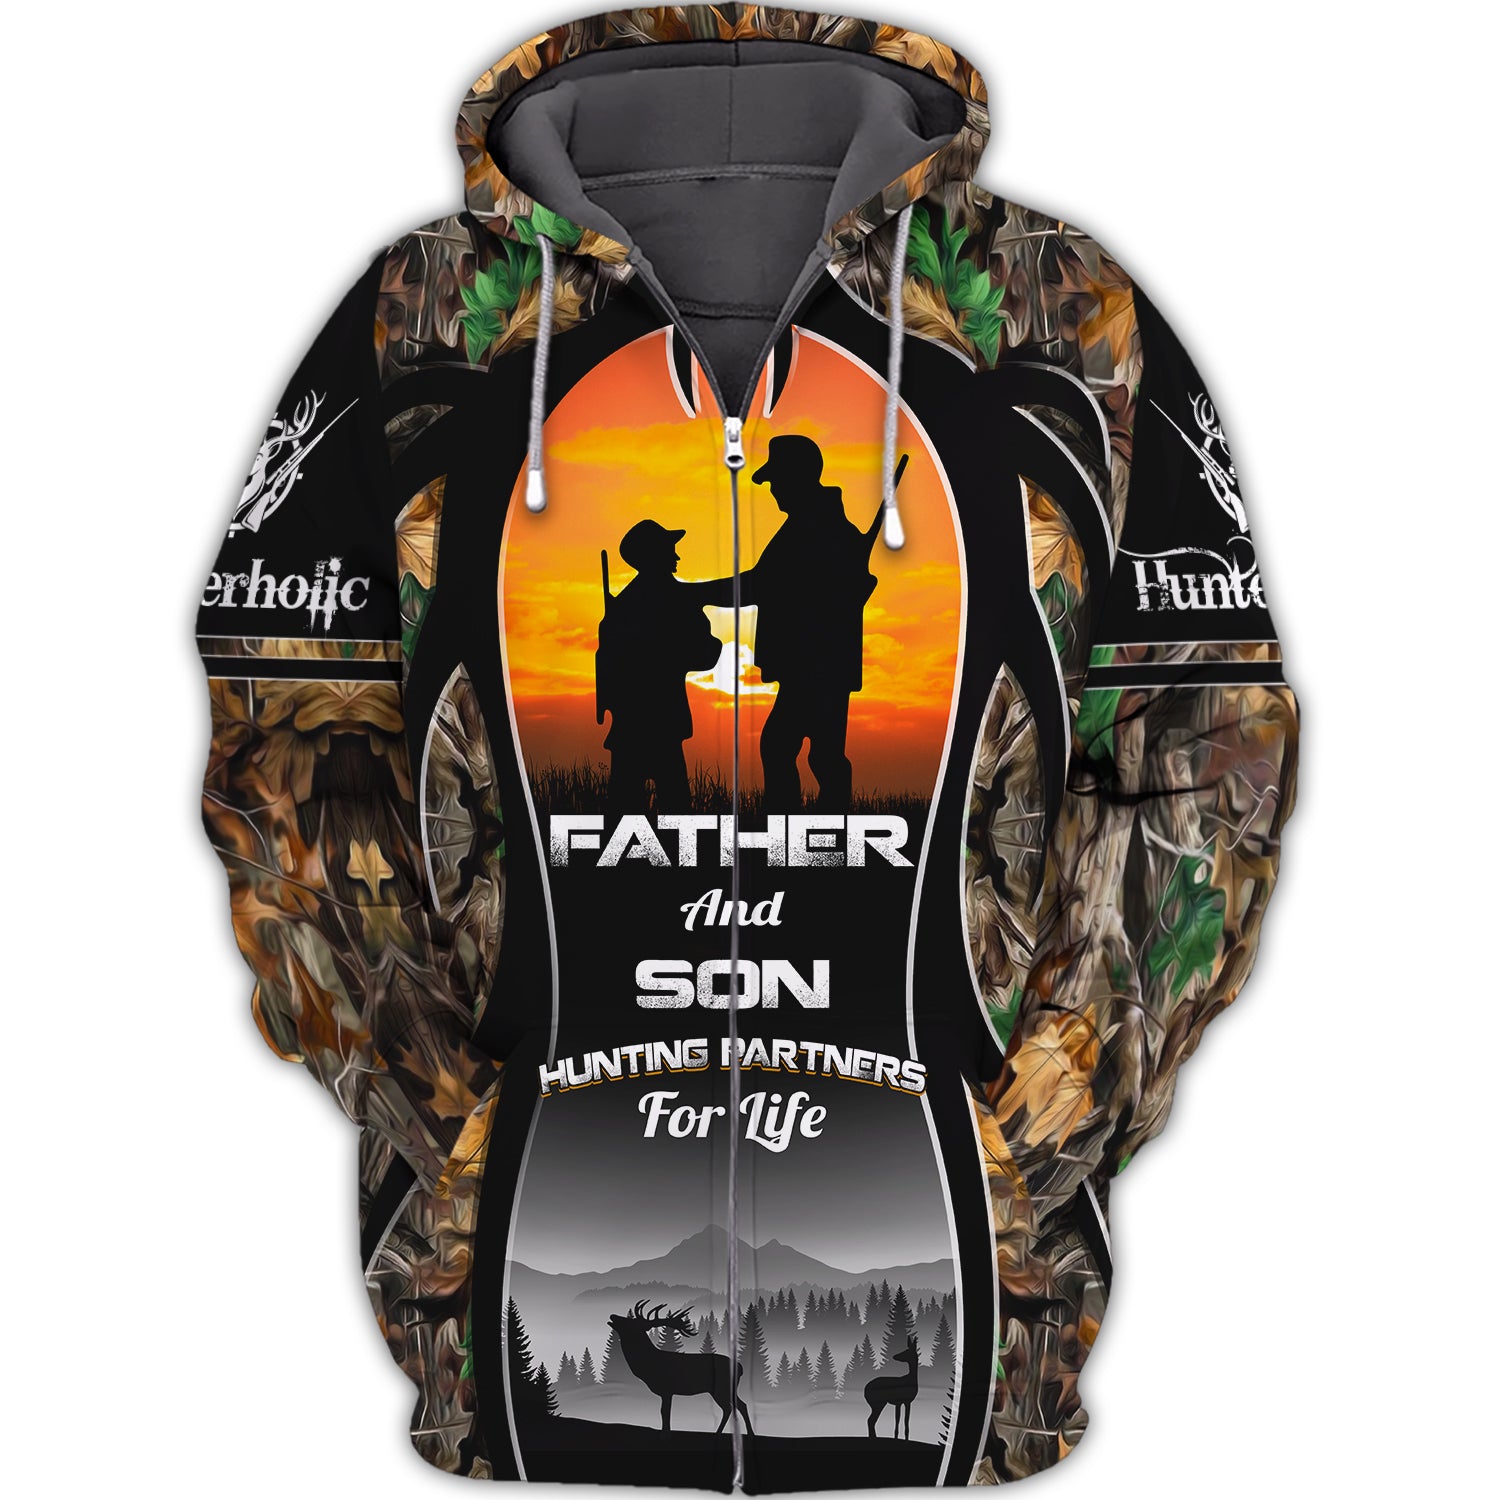 Father And Son Hunting Partners For Life Personalized Name 3D Zipper Hoodie 152, Nvc97